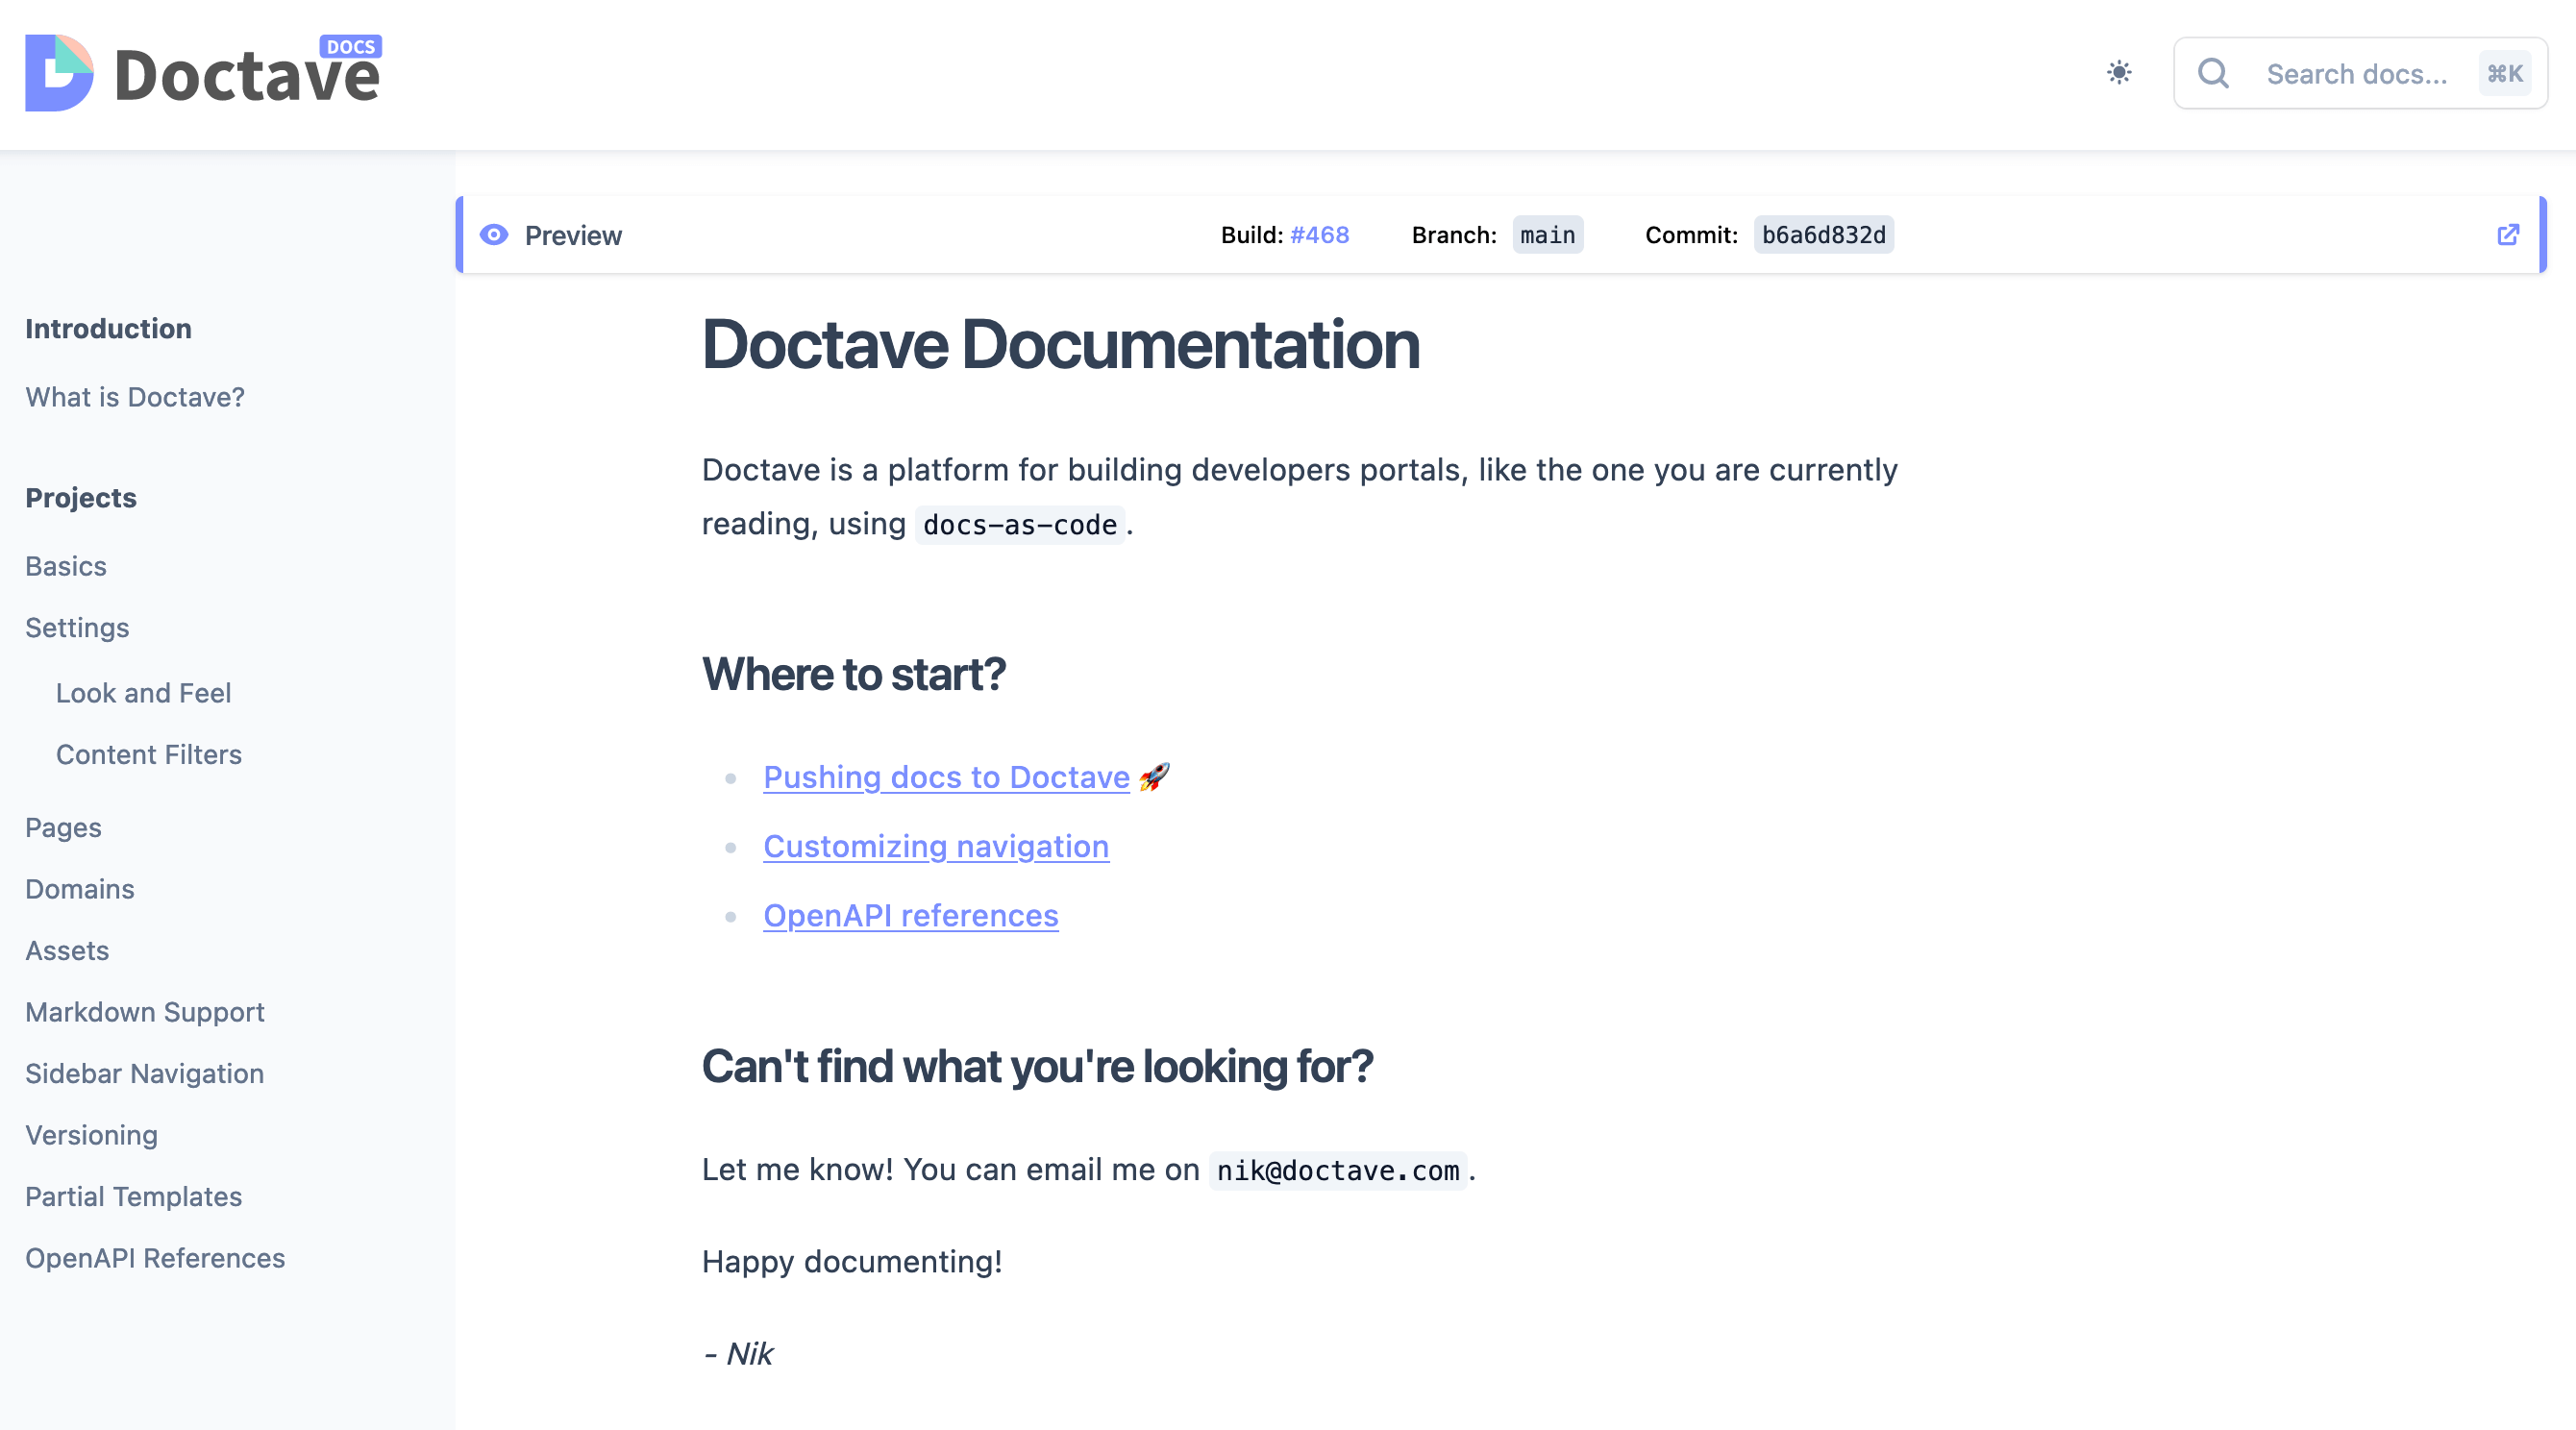 a screenshot of Doctave's documentation with a longer navigation referencing
various features we built